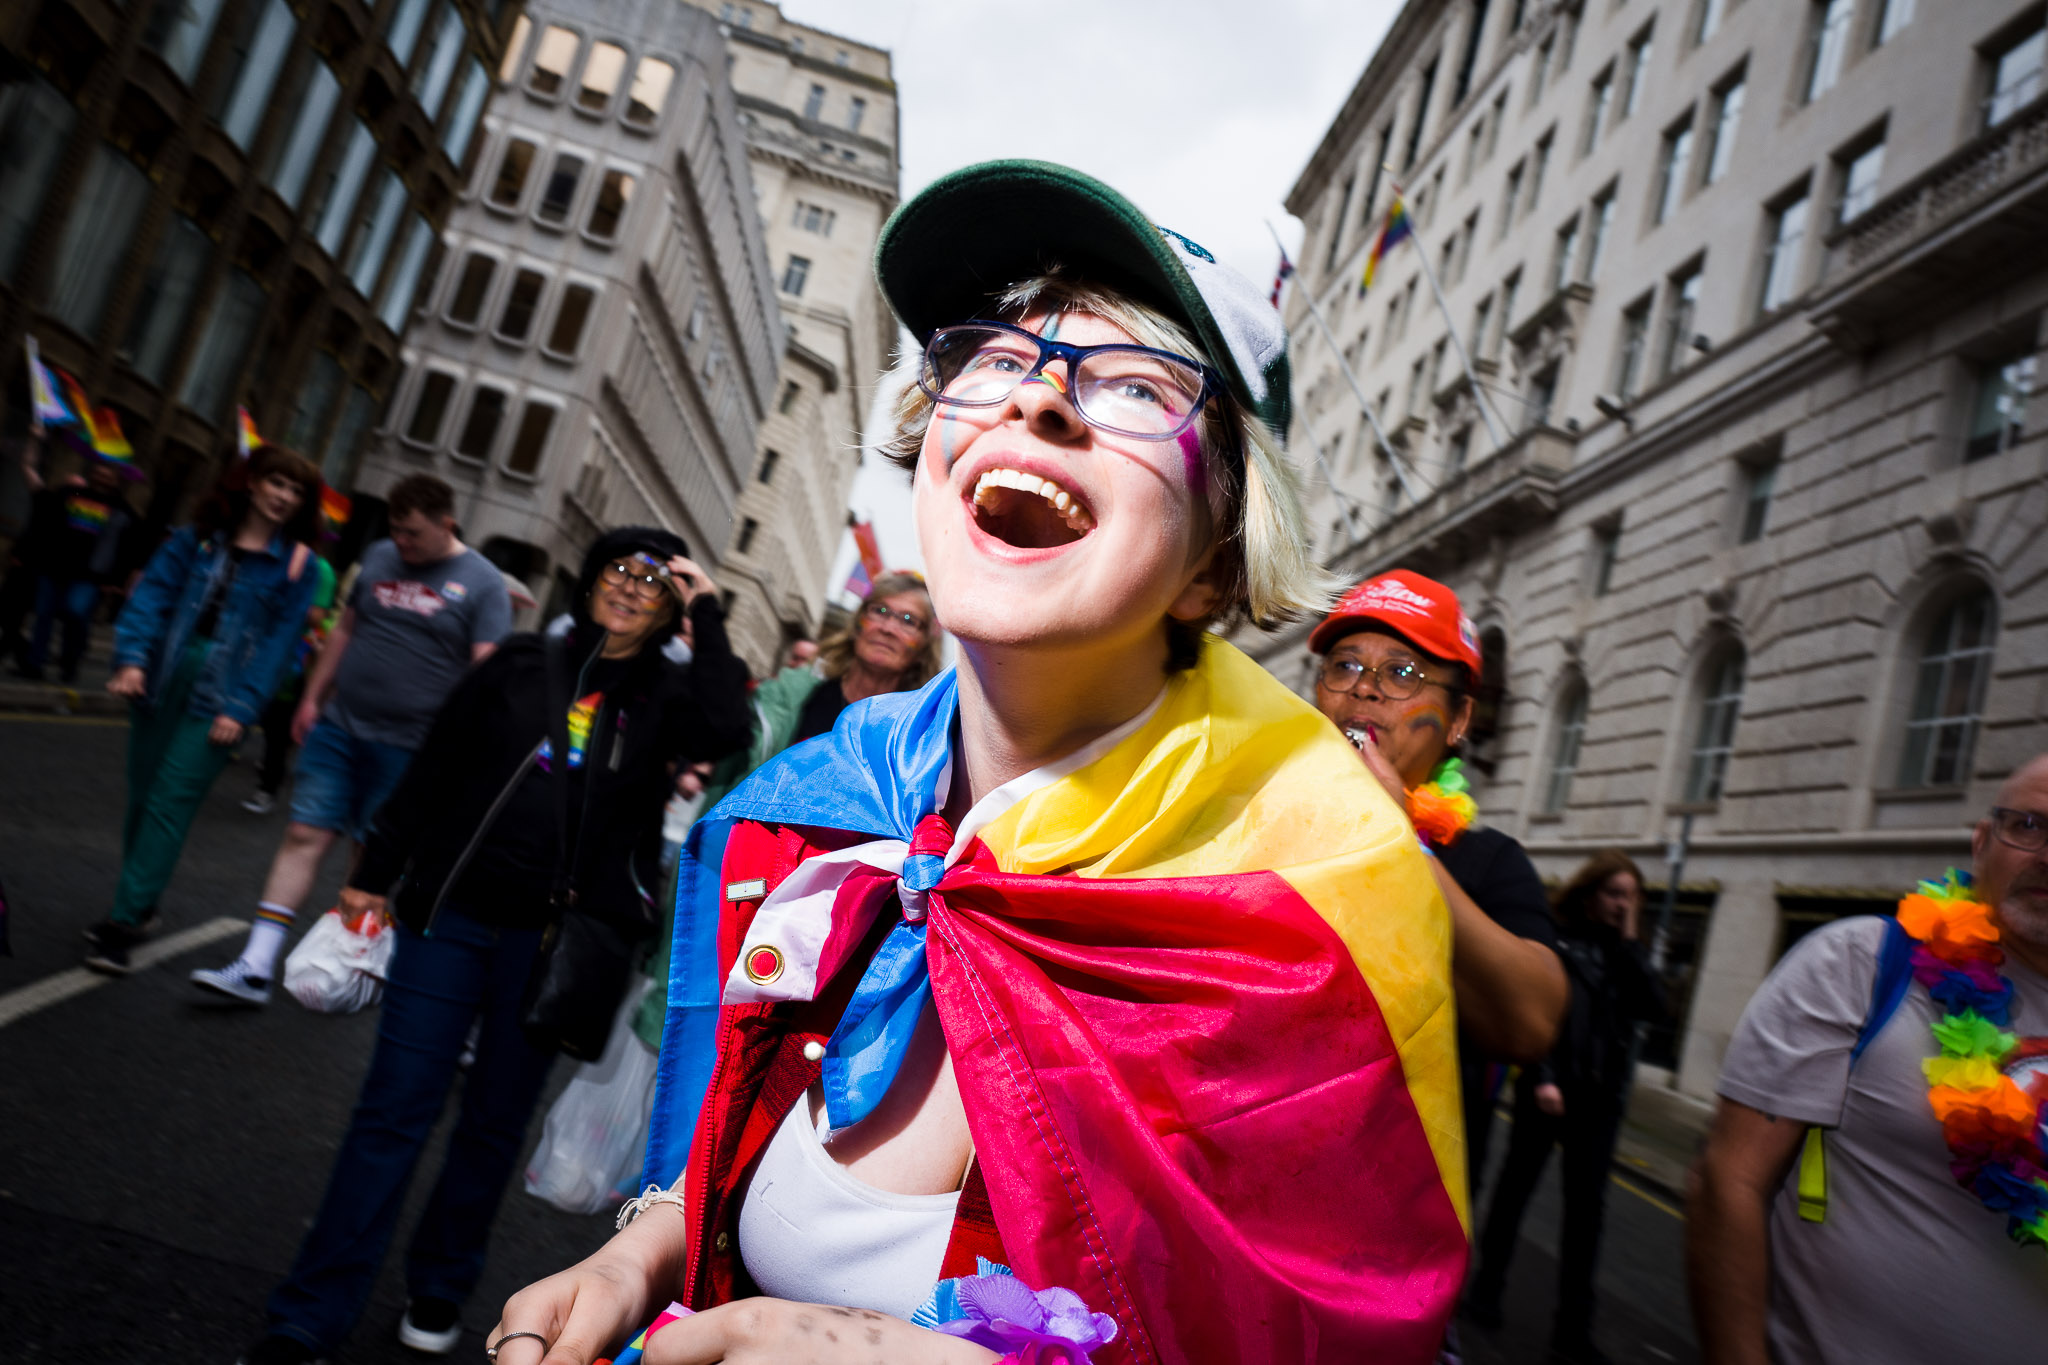 A person laughs while wearing a Pansexual pride flag. The are lit with a flash light lifting them from the background scene and framed by two buildings.